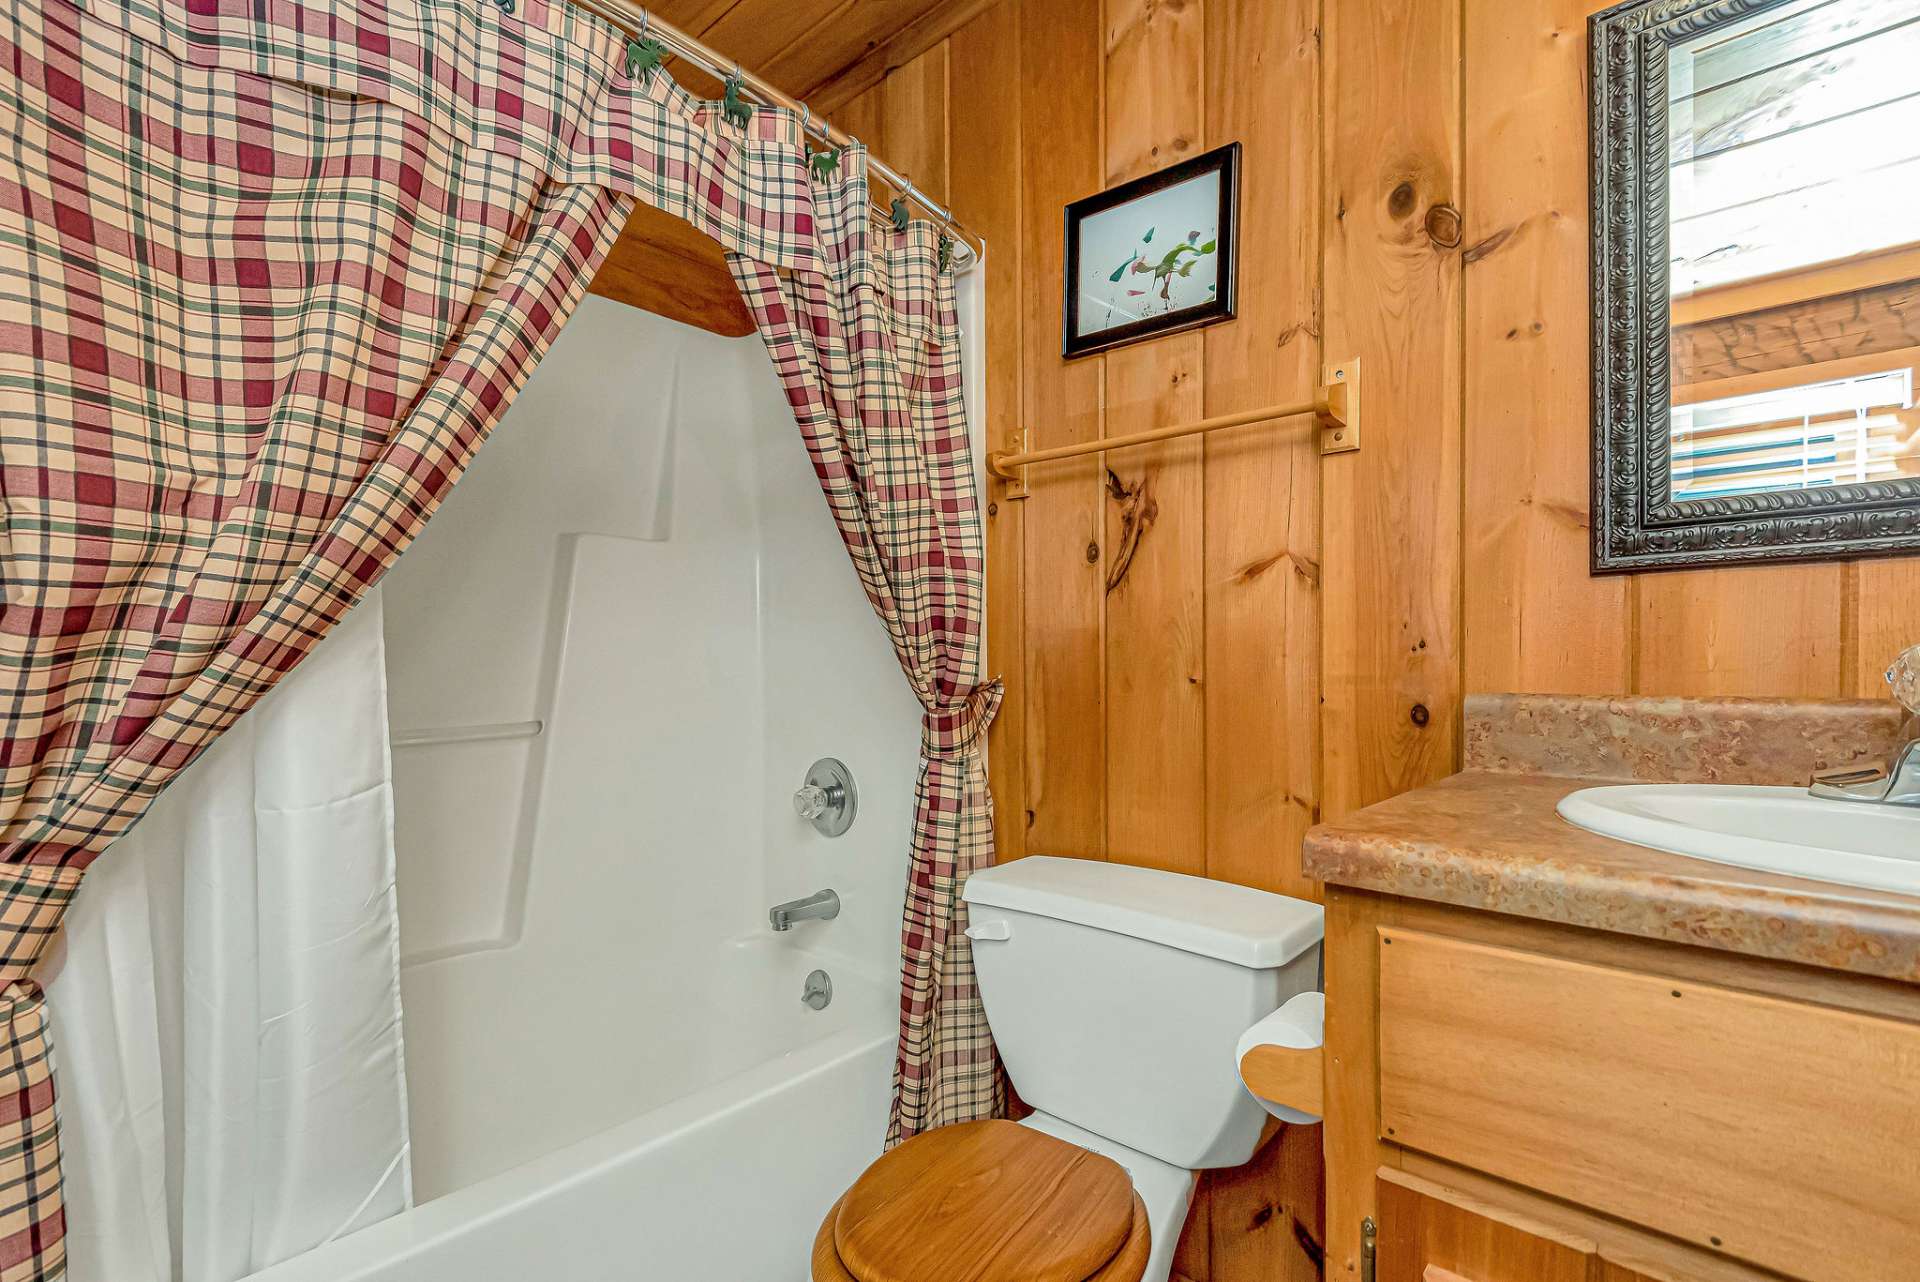 Your guest will enjoy their own private full bath.